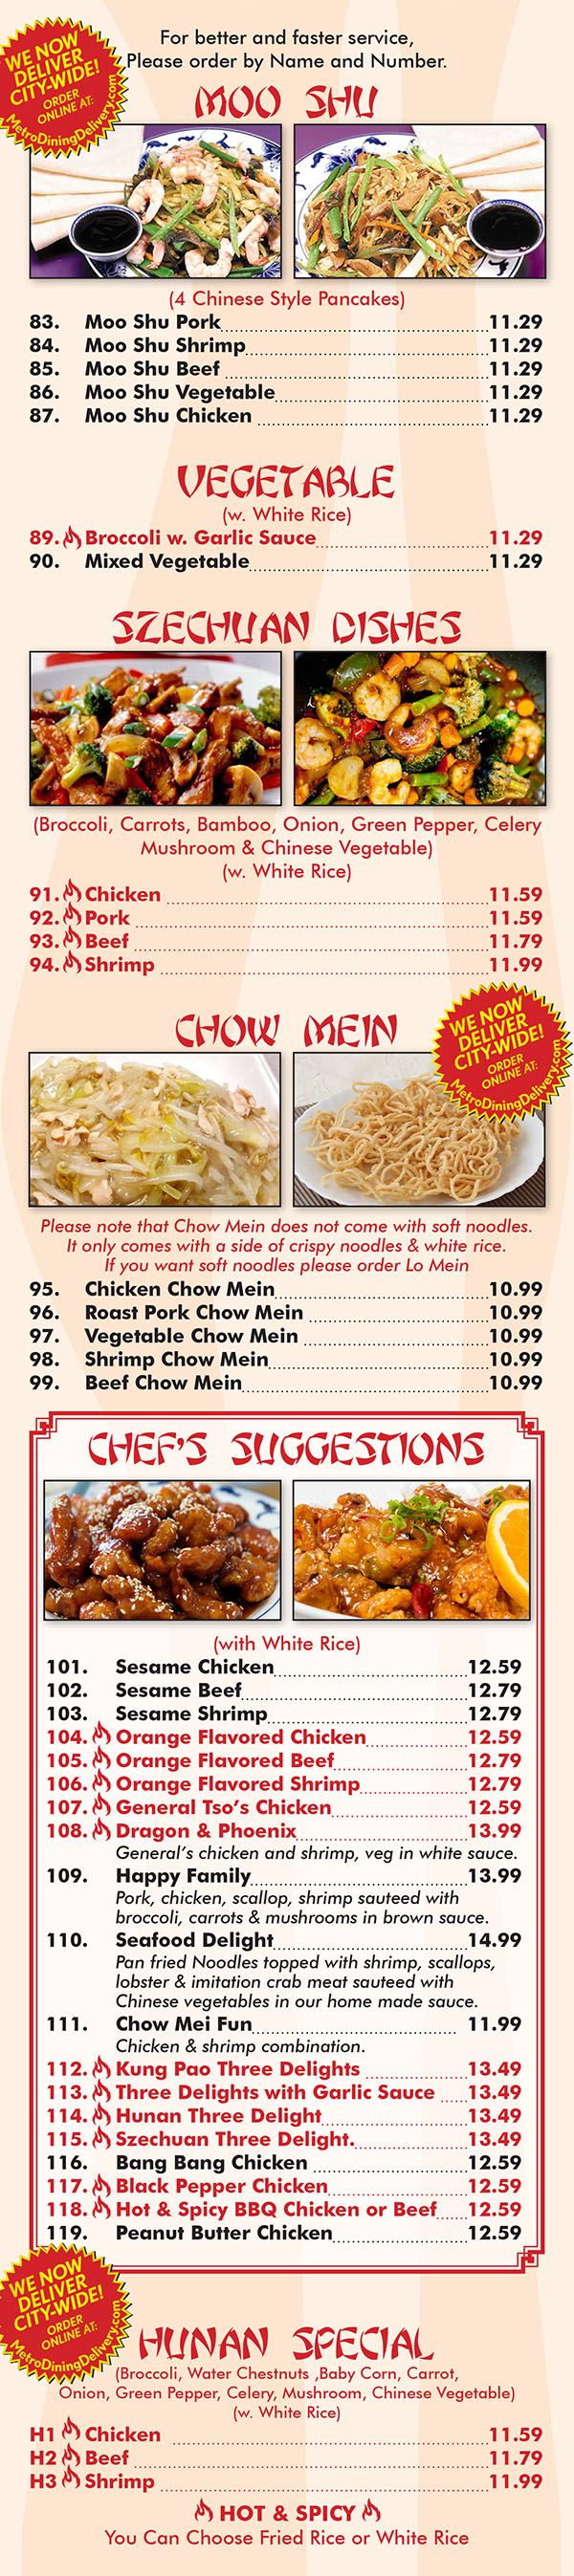 Ming's House Chinese Restaurant Menu Page 4
  MOO SHU
(4 Chinese Style Pancakes)
83. Moo Shu Pork 8.29
84. Moo Shu Shrimp 8.95
85. Moo Shu Beef 8.85
86. Mac ShuV egetable 7.89
87. Moo Shu Chicken 8.95
(w. White Rice)
89.\Broccoliw . Garlic Sauce........................... 7.95
90. MixedV egetable 7.95
[Tl-131
CHEF’S SUGGESTIONS
(w.WhlteRice)
101. SesameChicken....................................9-15
102. Sesame Beef 9.65
103. sesameShrimp......,,,......,,......,,.......,.....9.95
104.\ Orange Flavored Chicken......... 9.25
105.\ Orange Flavored Beef“ . .. 9.65
106.\ Orange Flavored Shrimp .. 9.95
107.\ General Tso’s Chicken........................ 9.15
108.\ Dragon & Phoenix 10.95
Genera/is chicken and shrimp, veg in white sauce.
109. Happy Family 10.95
Pork, chicken, scallop, shrimp sauteed with broccoli,
carrots 8. mushrooms in brown sauce.
110. Seafood Delight 11.95
Pan tned Noodles lapped wilh shrimp, scallops, Iobsler
ml... crab meat sauteed with Chinese vegetables ln
our home made sauce.
111. Chow Mei Fun 8.95
Chicken 8. shrimp COmblflGflGfl.
112.\ Kung Pao Three Delights.., 9.95
113. \ Three Delights with Garlic Sauce... 9.95
114.\ Hunan Three Delight.......,,...... 9.95
115. \ Szechuan Three Delight........ 9.95
116. Bang Bang Chicken.............................. 9.35
117. \ Black Pepper Chicken... . 9.95
118. \ Hot 8. Spicy BBQ Chicken .... 9.95
H 119. Peanut Butter Chicken.................9.35 1
SZECHUAN DISHES
(Broccoli, Carrots, Bamboo, Onion, Green Pepper,
Celery Mush room a. chinese Vegetable)
(w. White Rice)
91.\Chicken 8.39
92\Pork 8.39
93\Beef 8.99
94-\Shrimp.. 9.29
CHOW MEIN
(w. Crispy Noodle)(w. White Rice)
95. Chicken Chow Mein 7.25
96. Roast Pork Chow Meln 7.25
97. Vegetable Chow Meln 6.85
98. Shrimp Chow Mam 7.35
99. Beef Chow Mein 7.35
HUNAN SPECIAL
(Broccoli, Water Chestnuts ,Baby Corn, Carrot, Onion,
Green Pepper, Celery, Mushroom, chinese Vegetable)
(w. White Rice)
H1.\Chicken. 8.39
HZBBeefflm. 8.99
H3.\Shrimp............. 9.29